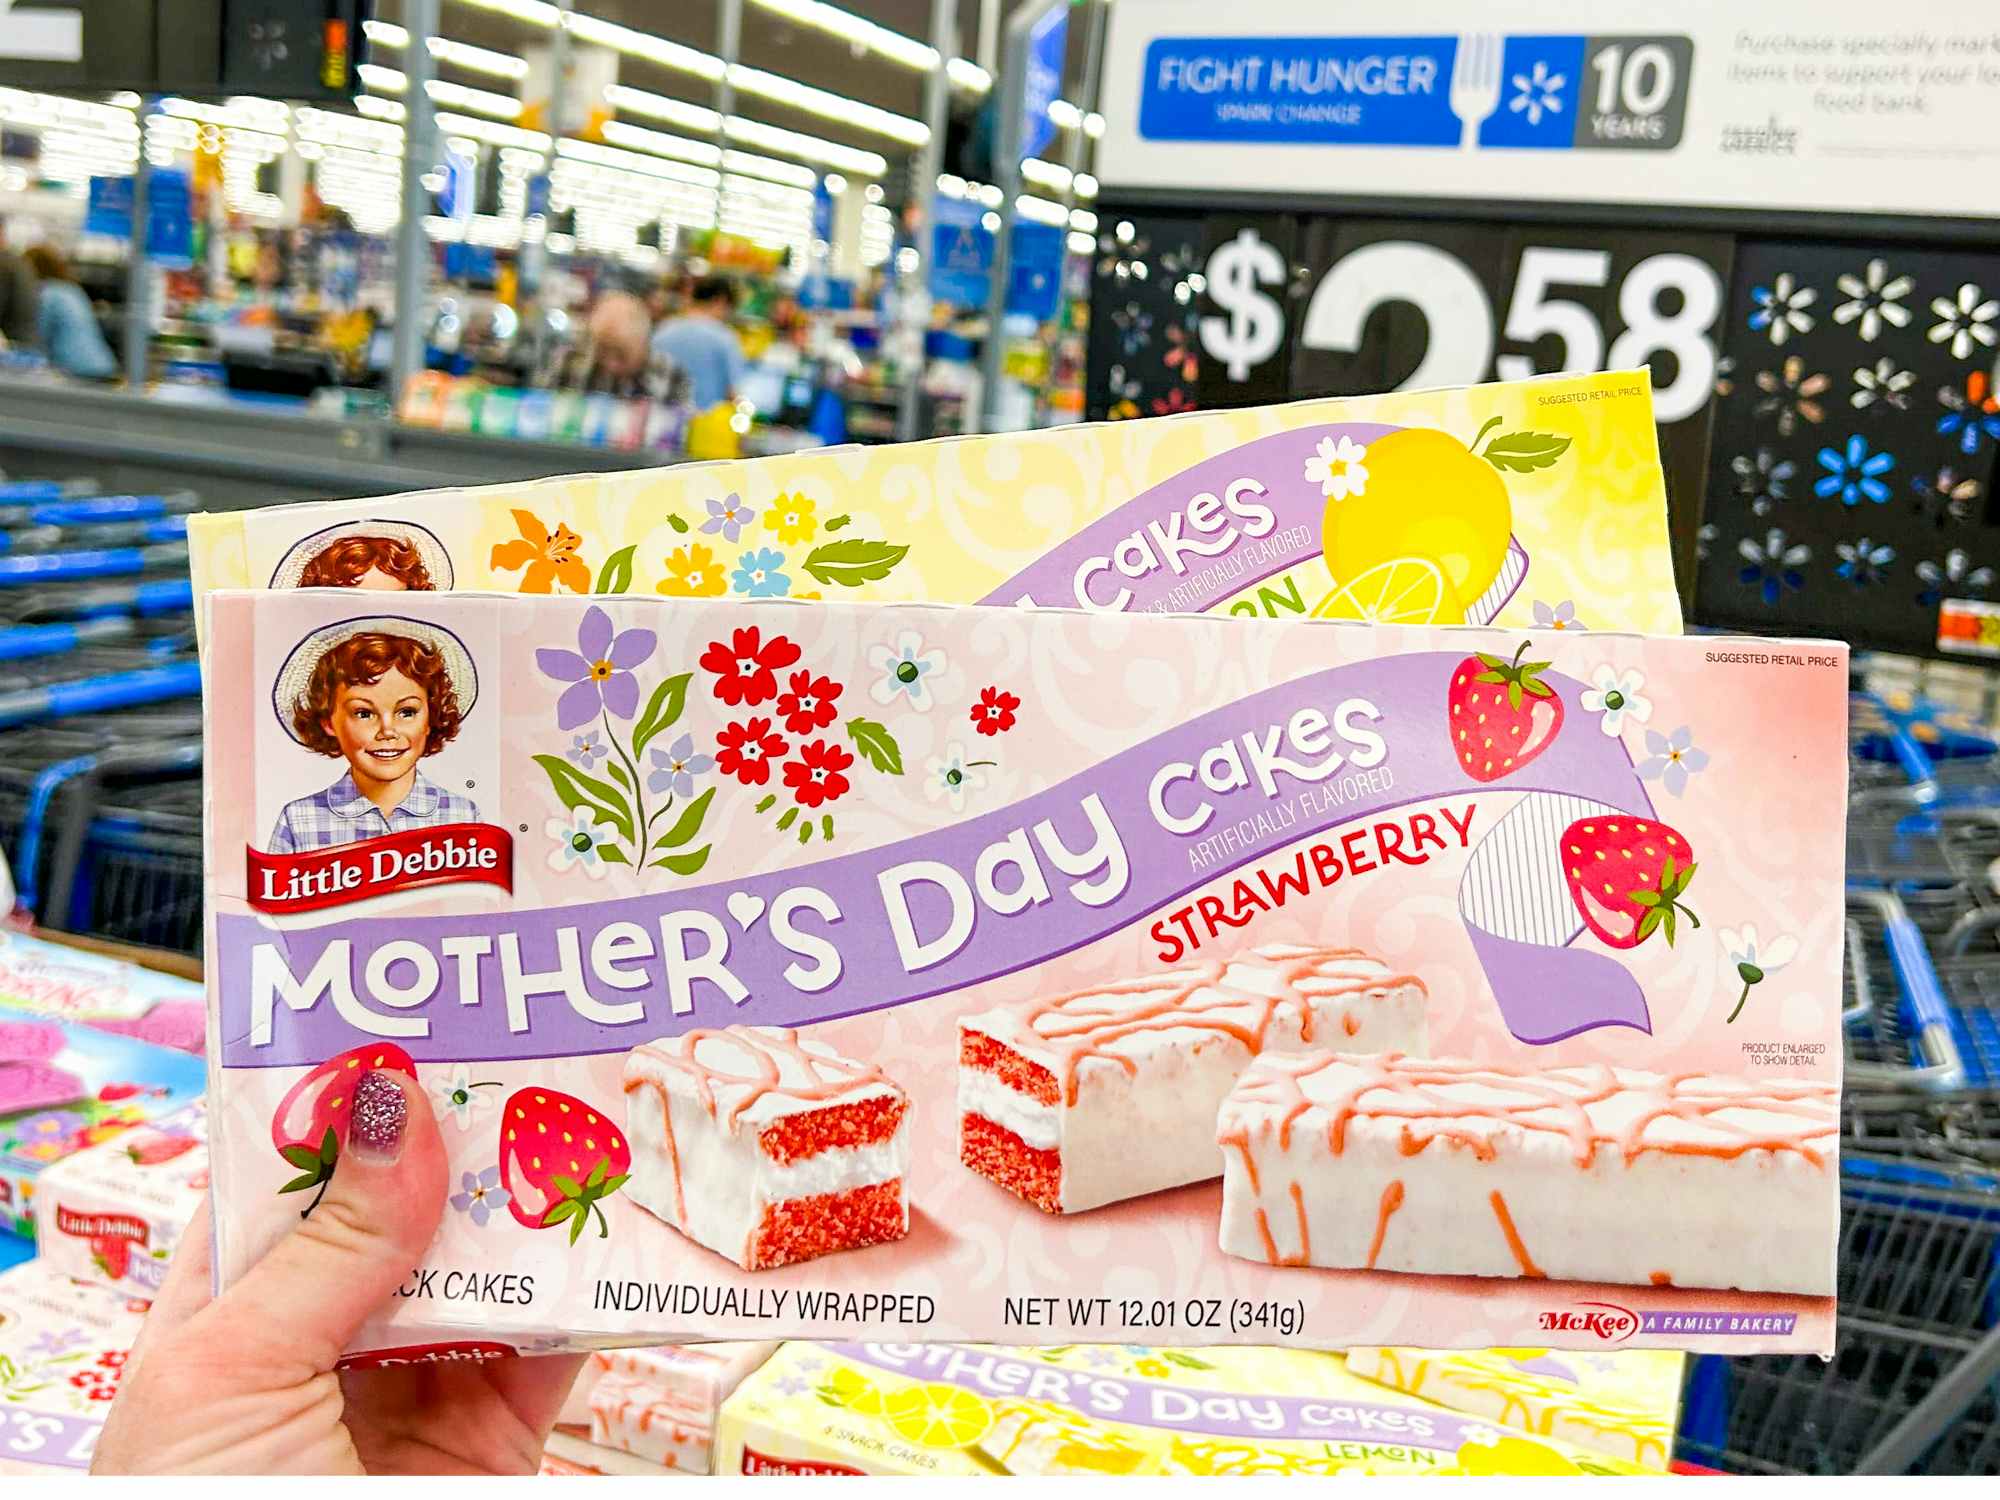 Someone holding boxes of Little Debbie Mother's Day Cakes in Walmart